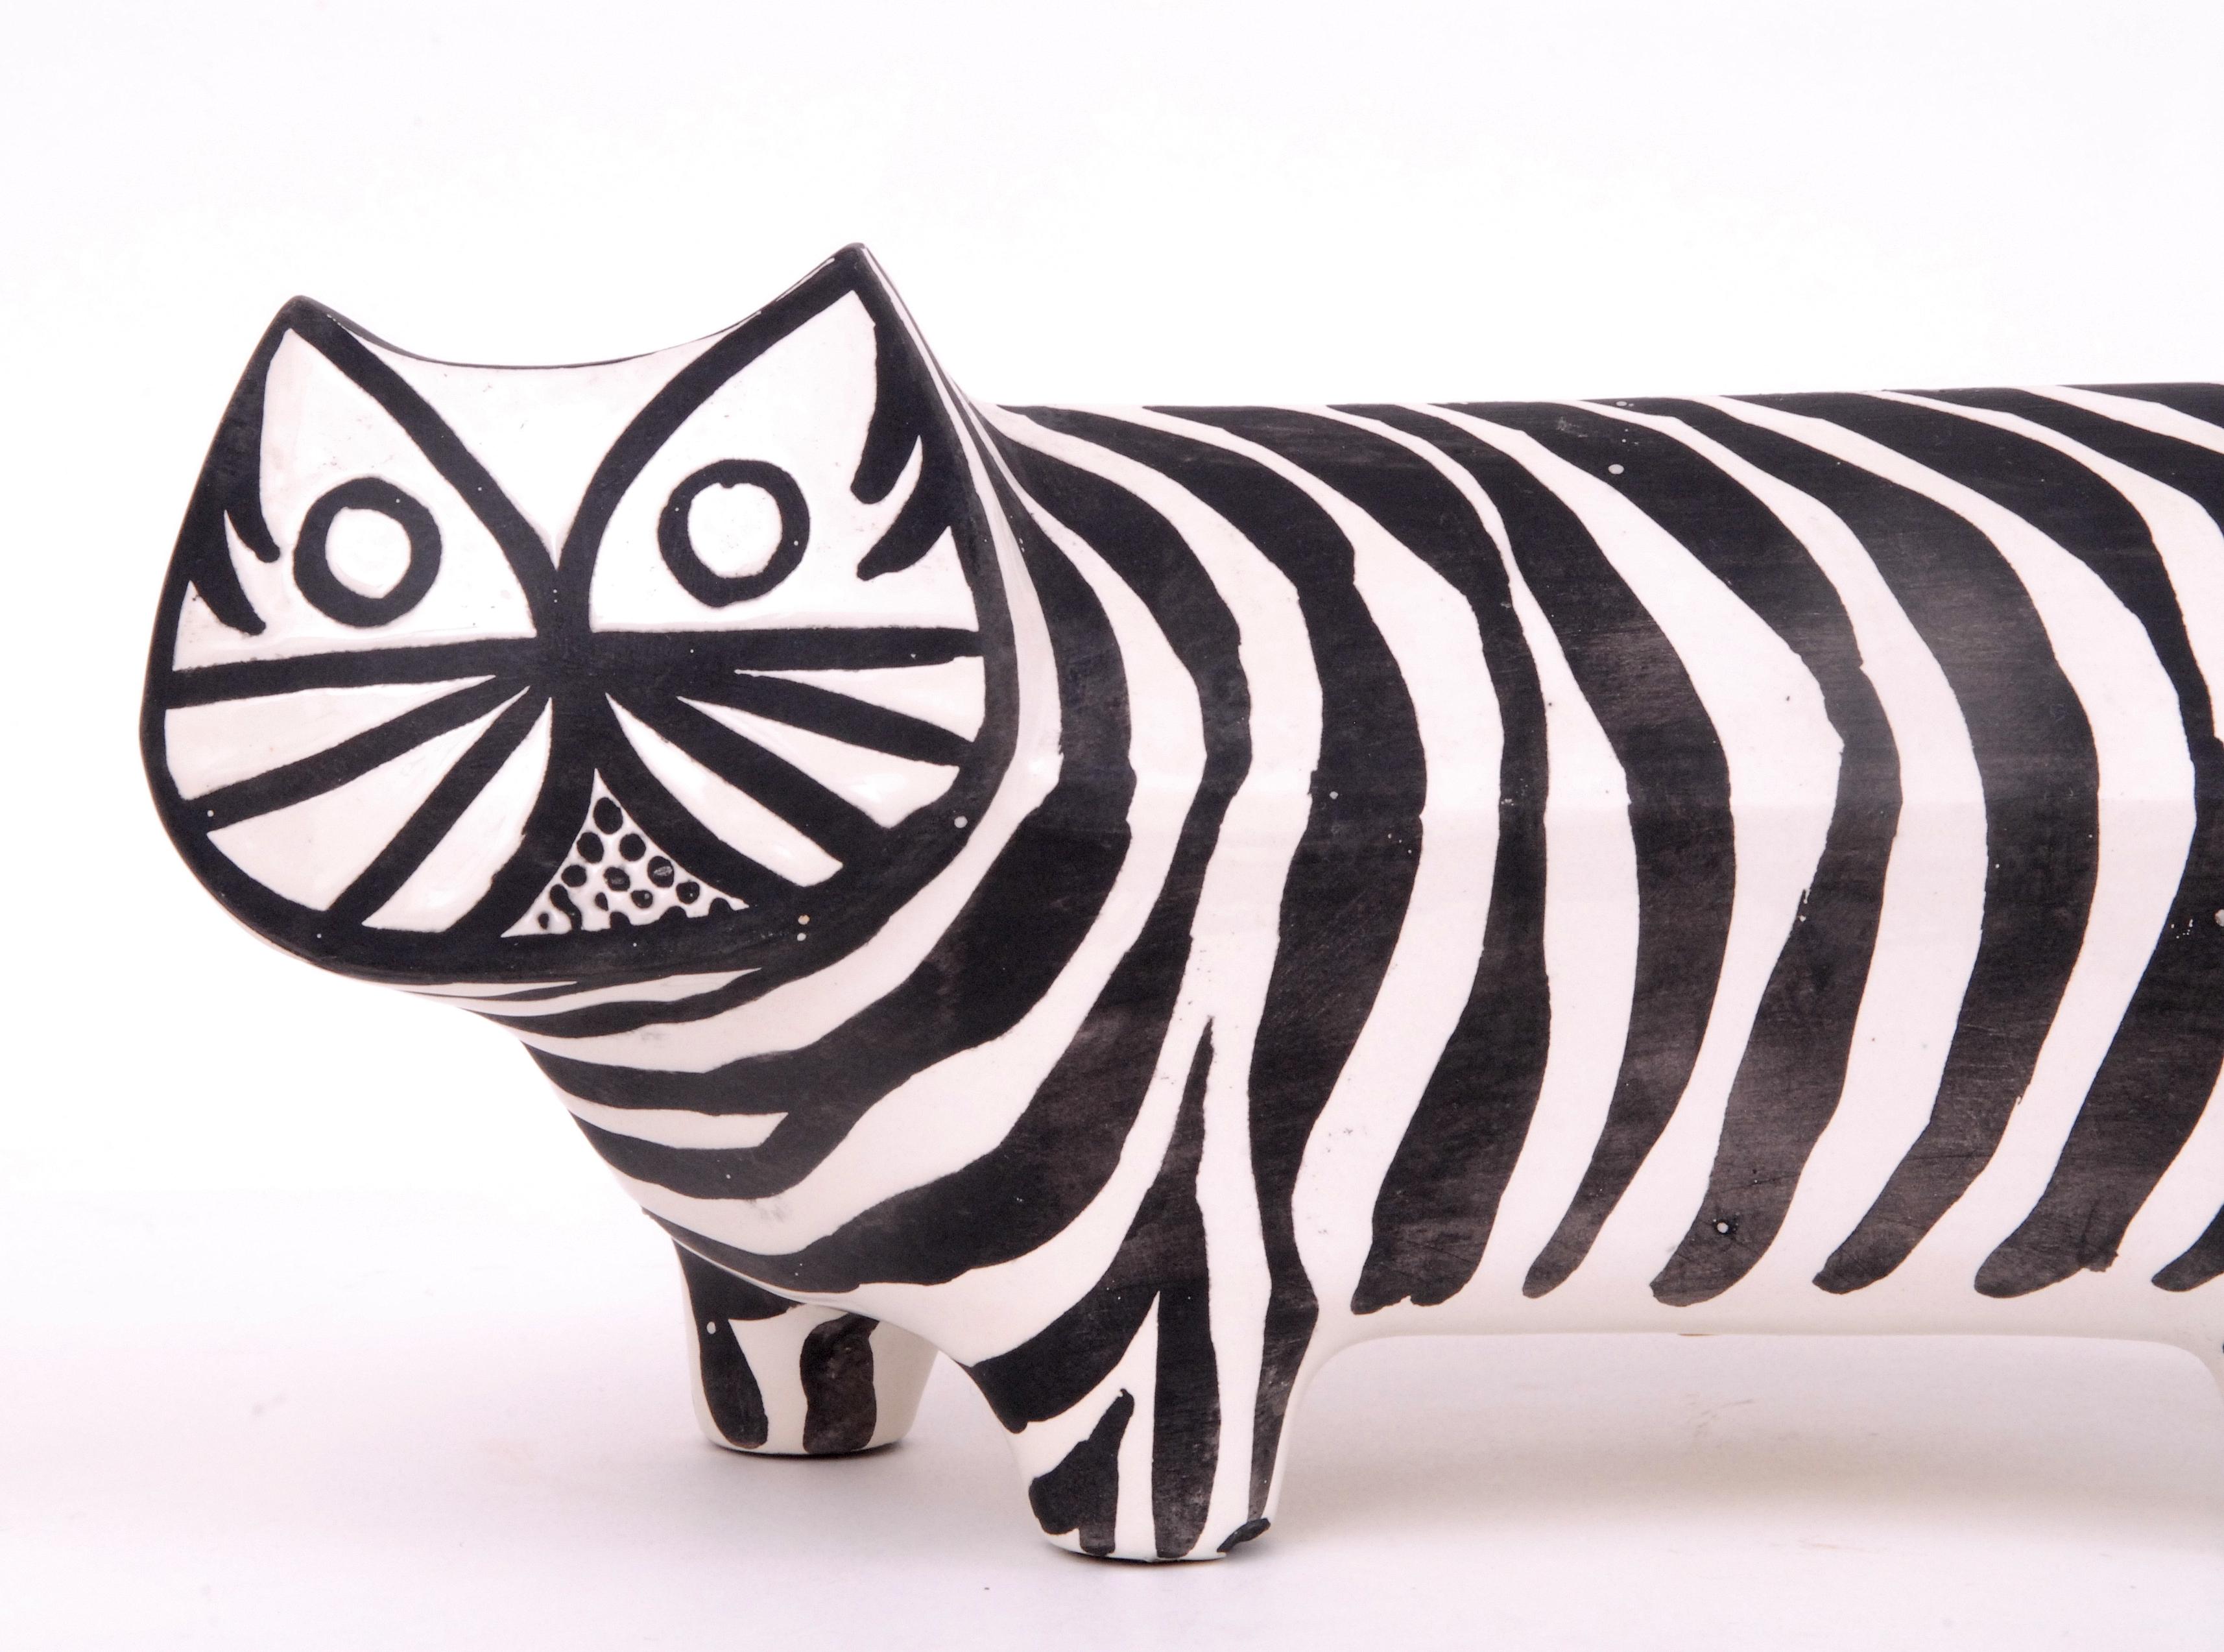 A lovely elongated walking cat in white with black stripes delineating its features. Signed in black underneath and with its original Raymor paper label.
One front foot has very minor damage to the inside section, not visible from the front.